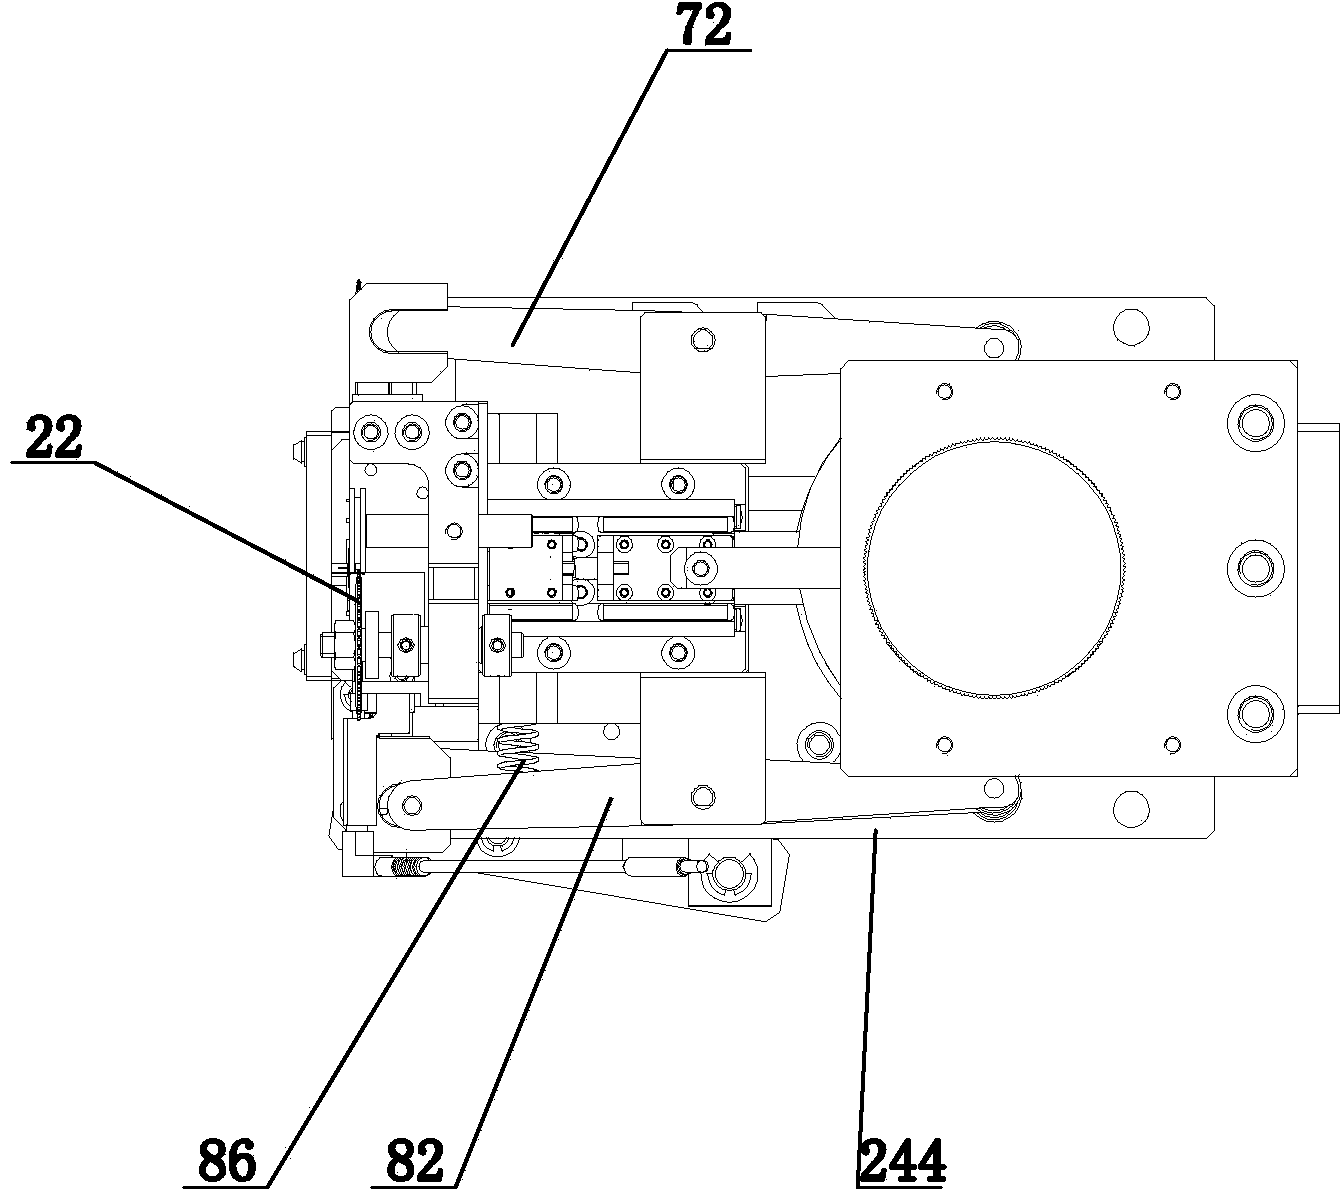 High-speed insertion device for cutting terminal